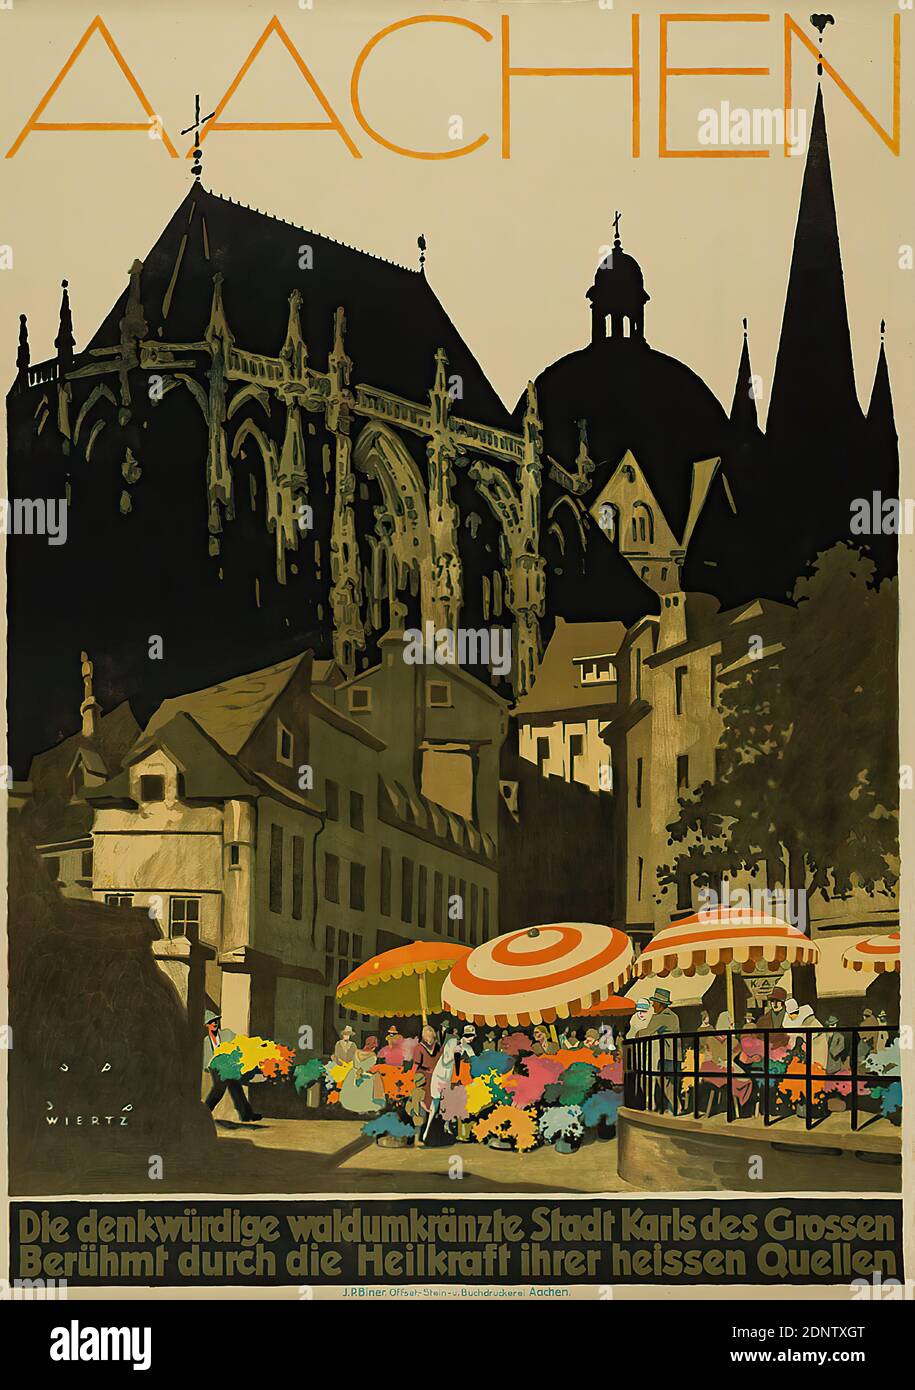 J. P. Biner, Jupp Wiertz, Aachen - The memorable wooded city of Charlemagne. Famous for the healing power of its hot springs, paper, lithography, Total: Height: 96,2 cm; Width: 68,2 cm, signed: recto u. li. Print: JUPP WIERTZ, Tourism posters, City, City view (veduta), Exterior of a church Stock Photo